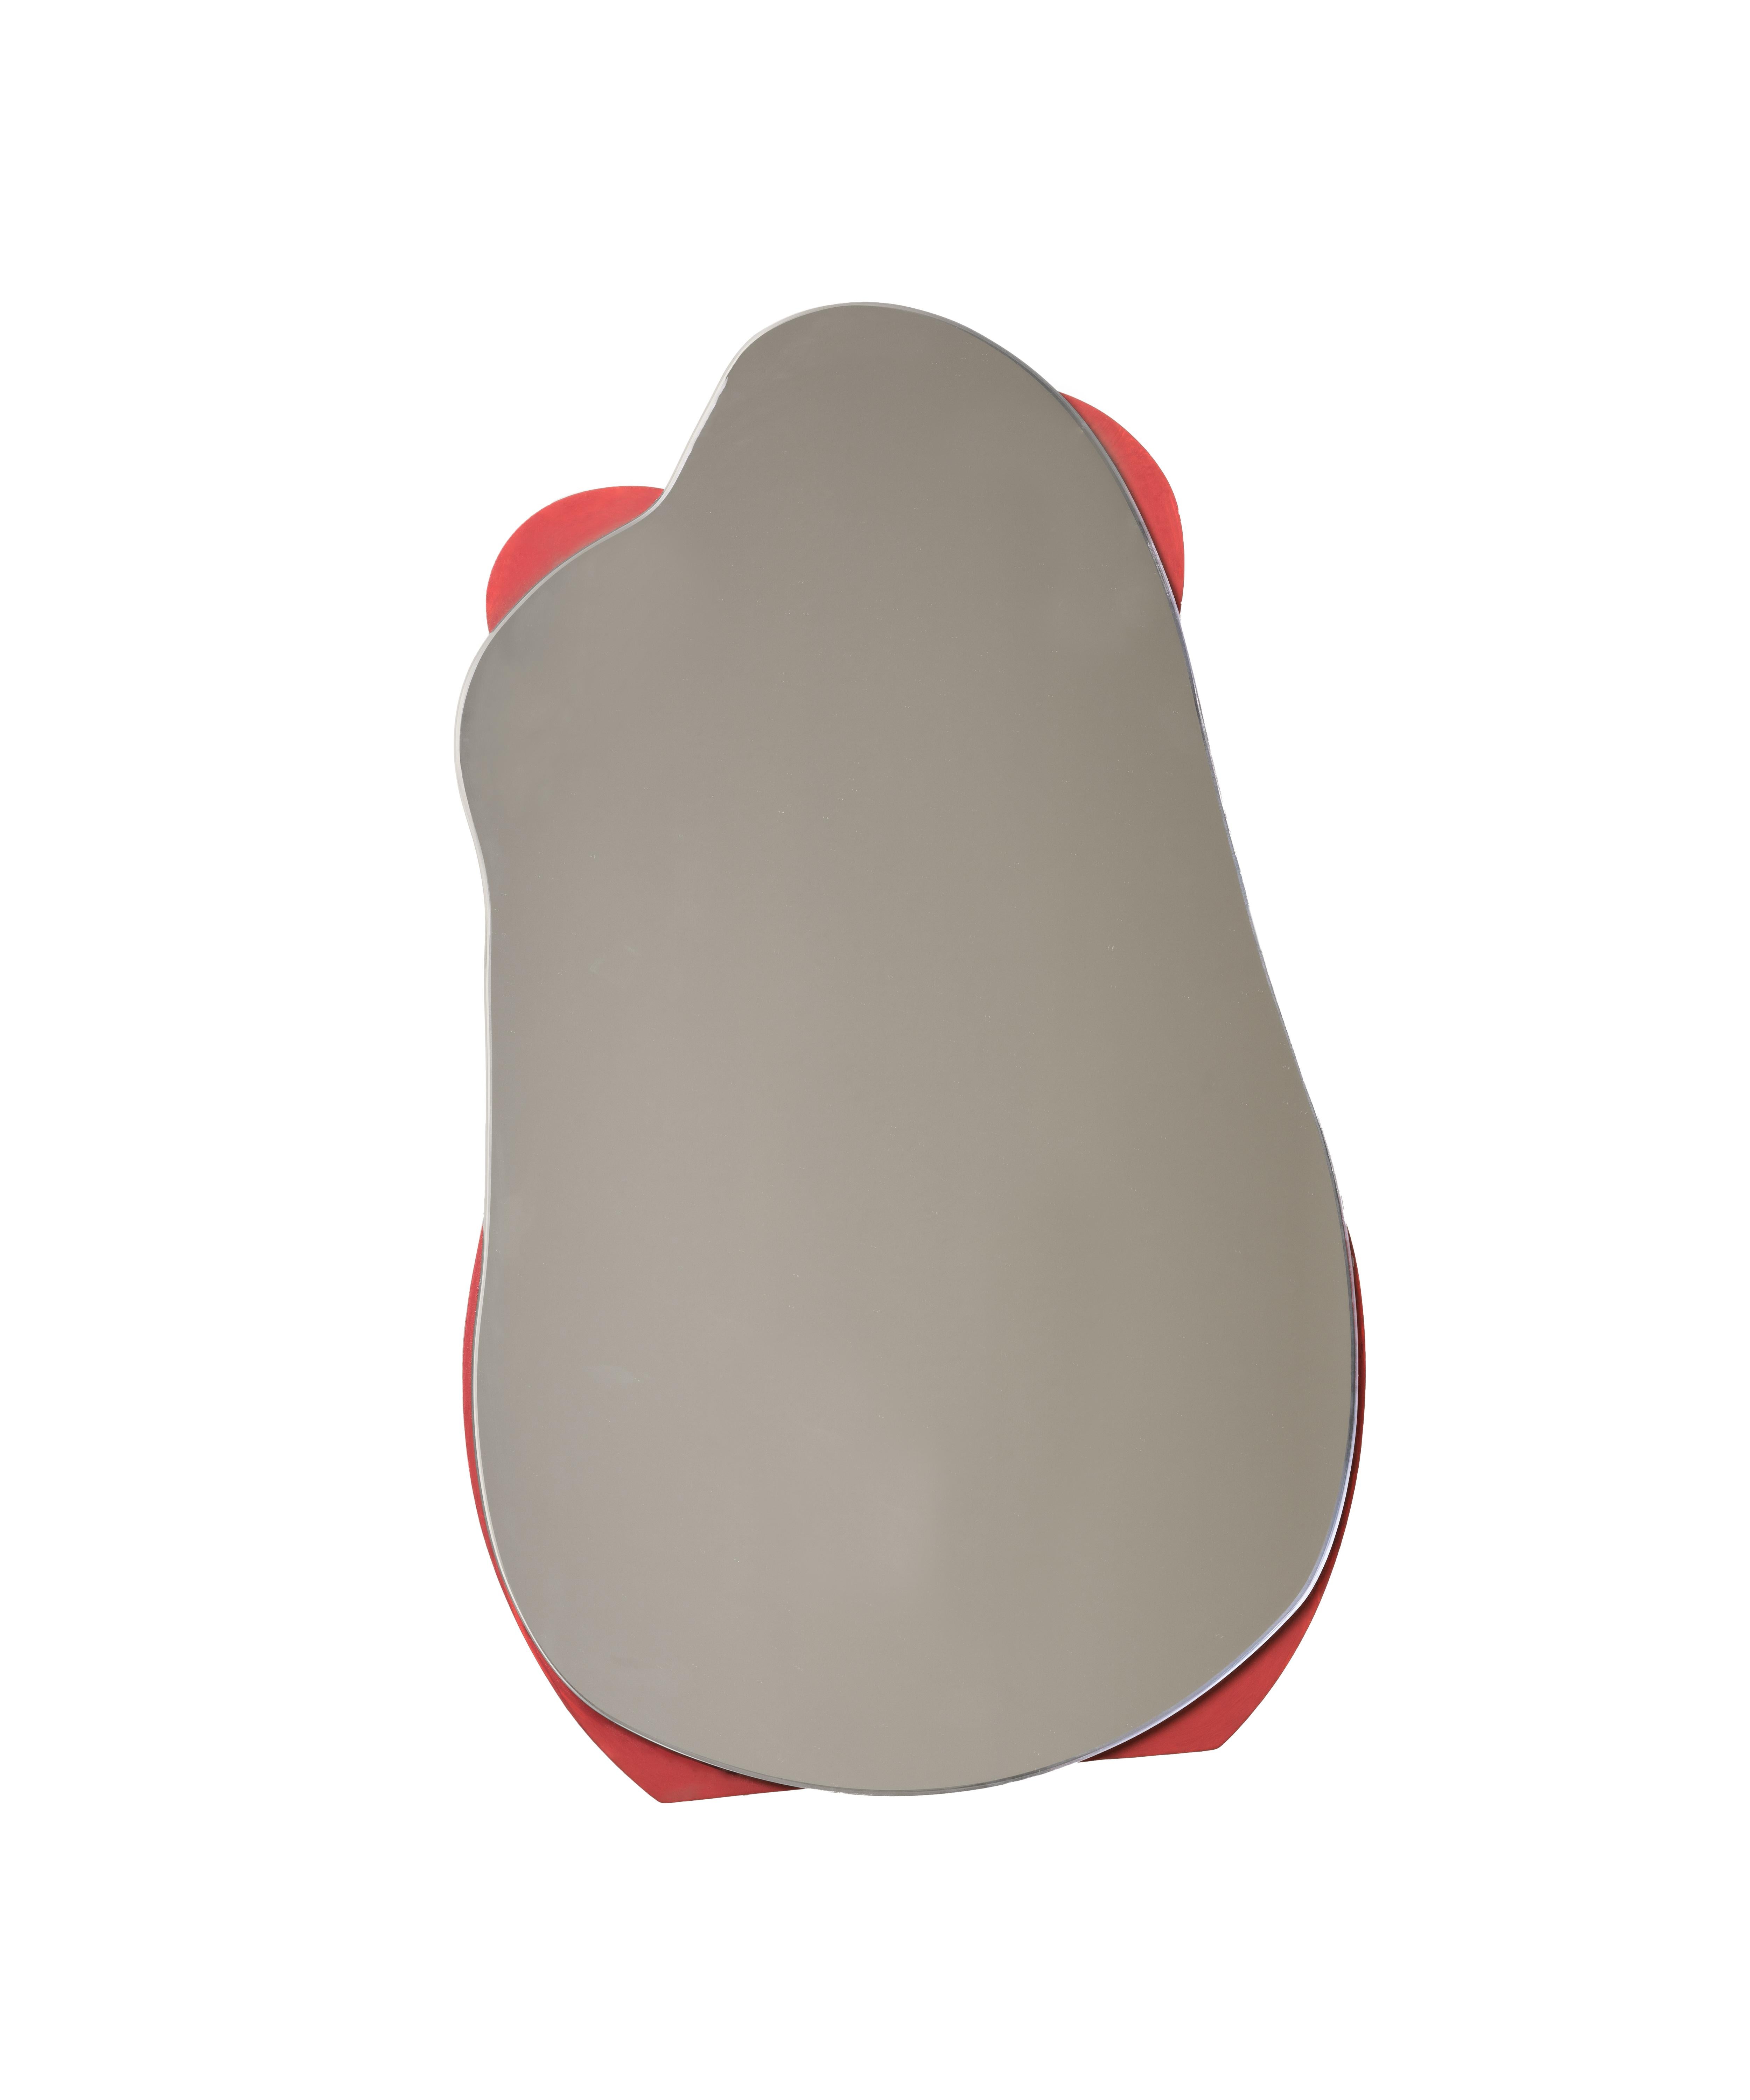 We introduce a certain fluidity to the cold, rigidity of a mirror
with this bold, colorful and vibrant piece. Almost jumping off a
wall, it cuts a curious form while functioning perfectly as an accent
mirror. This fluid fiberglass form is further